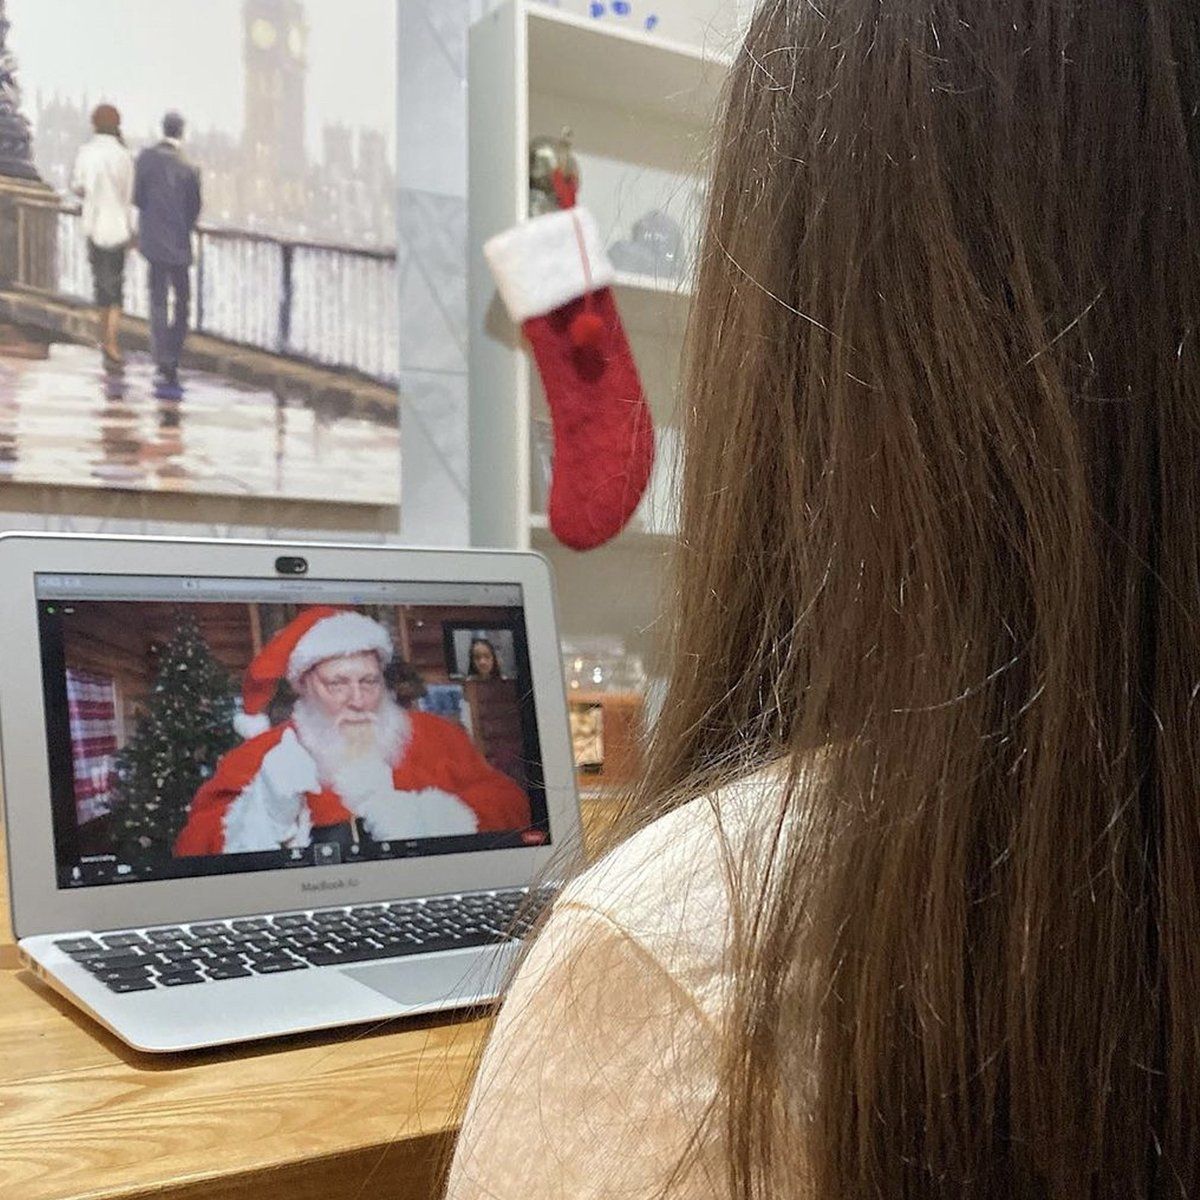 Video Call with Santa Claus